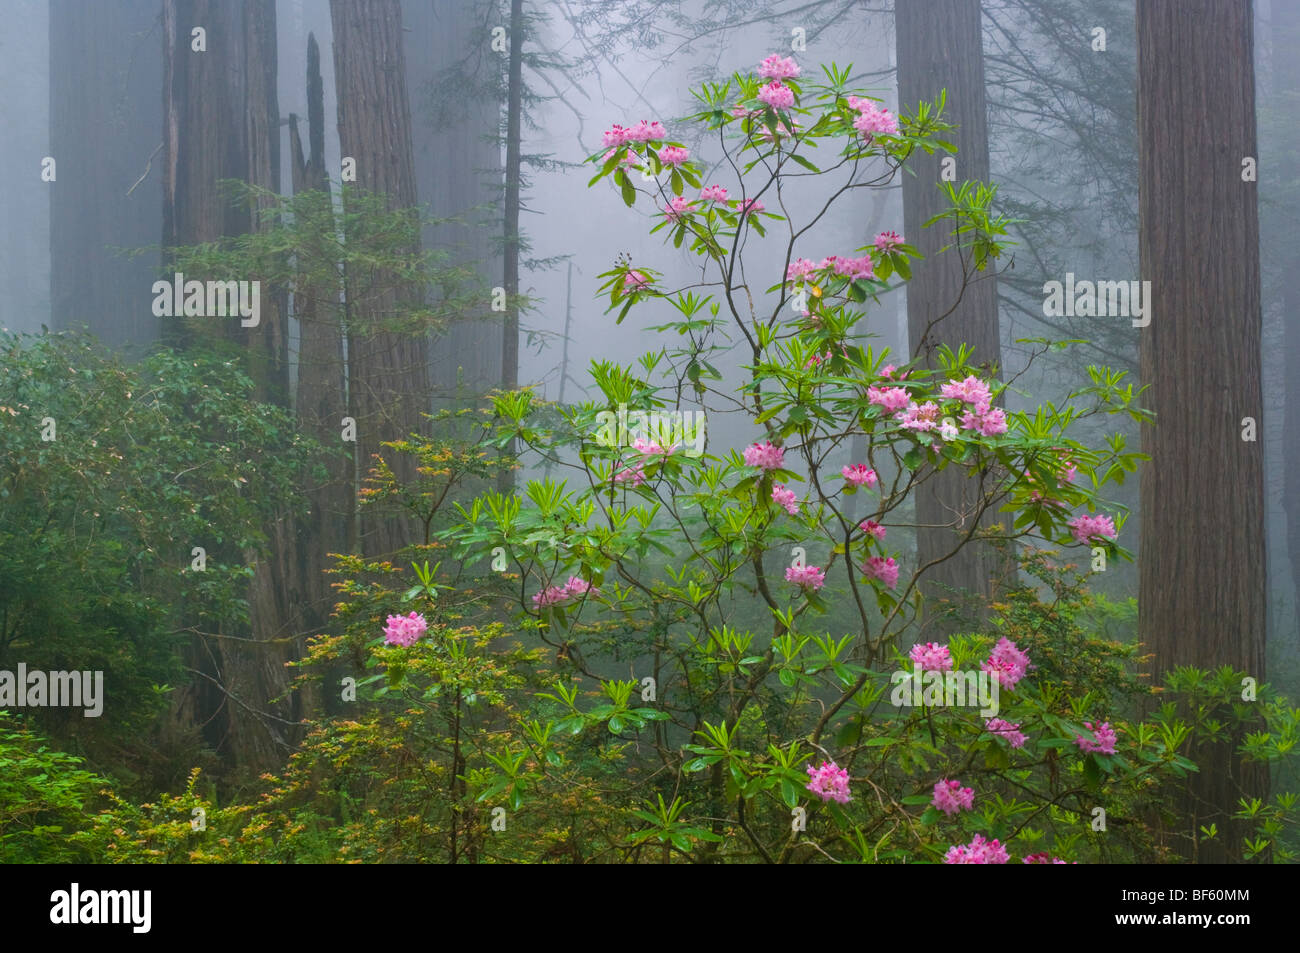 Wild Rhododendron flowers in bloom, Redwood trees, and fog in forest, Redwood National Park, California Stock Photo